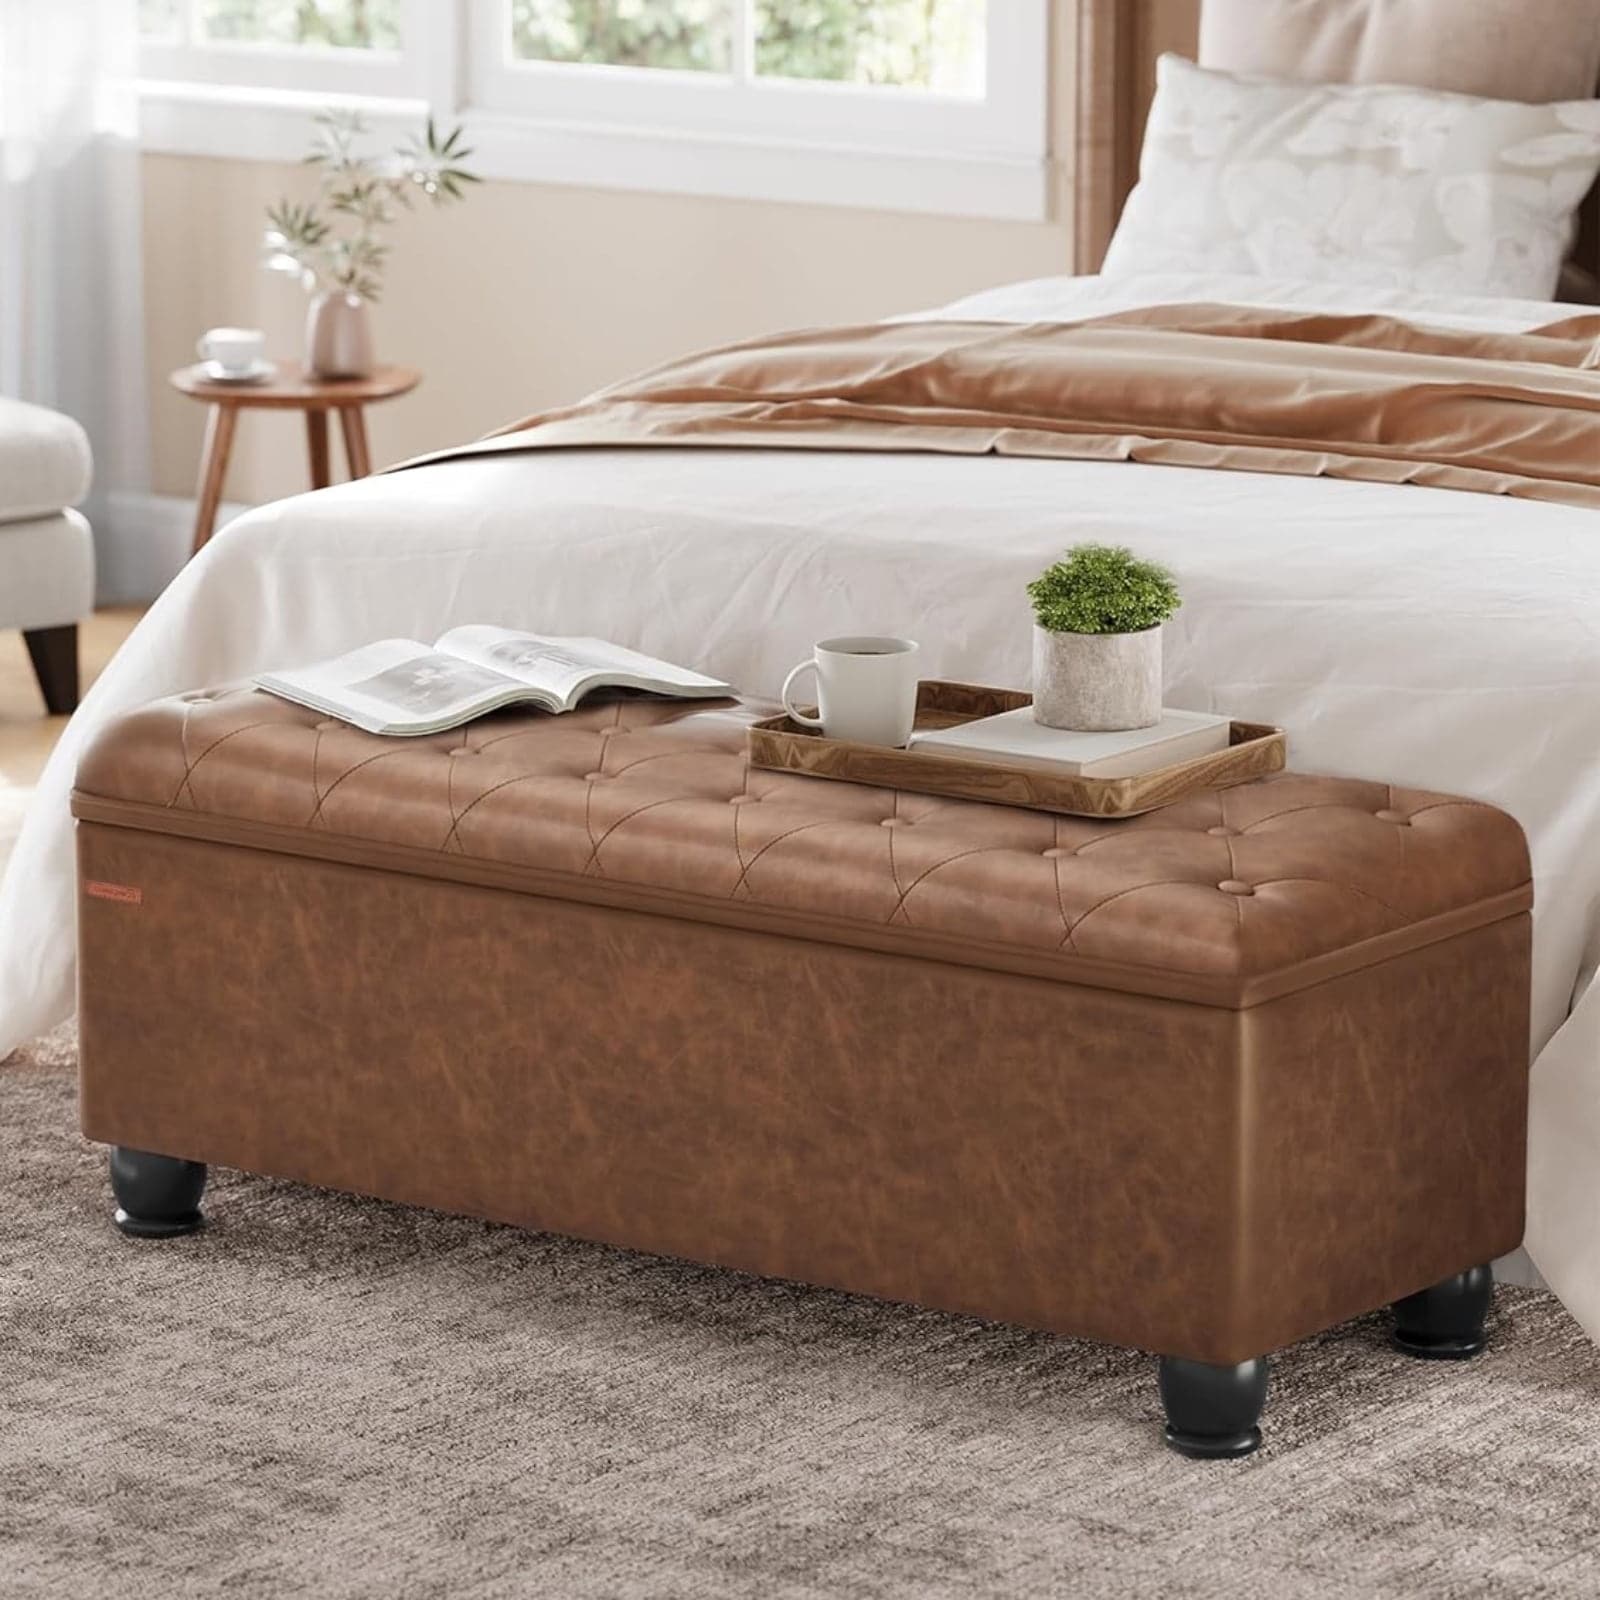 SONGMICS 46.5" Storage Ottoman Bench Storage Bench Bedroom Bench 330lb Loads Solid Wood Legs Coffee Brown